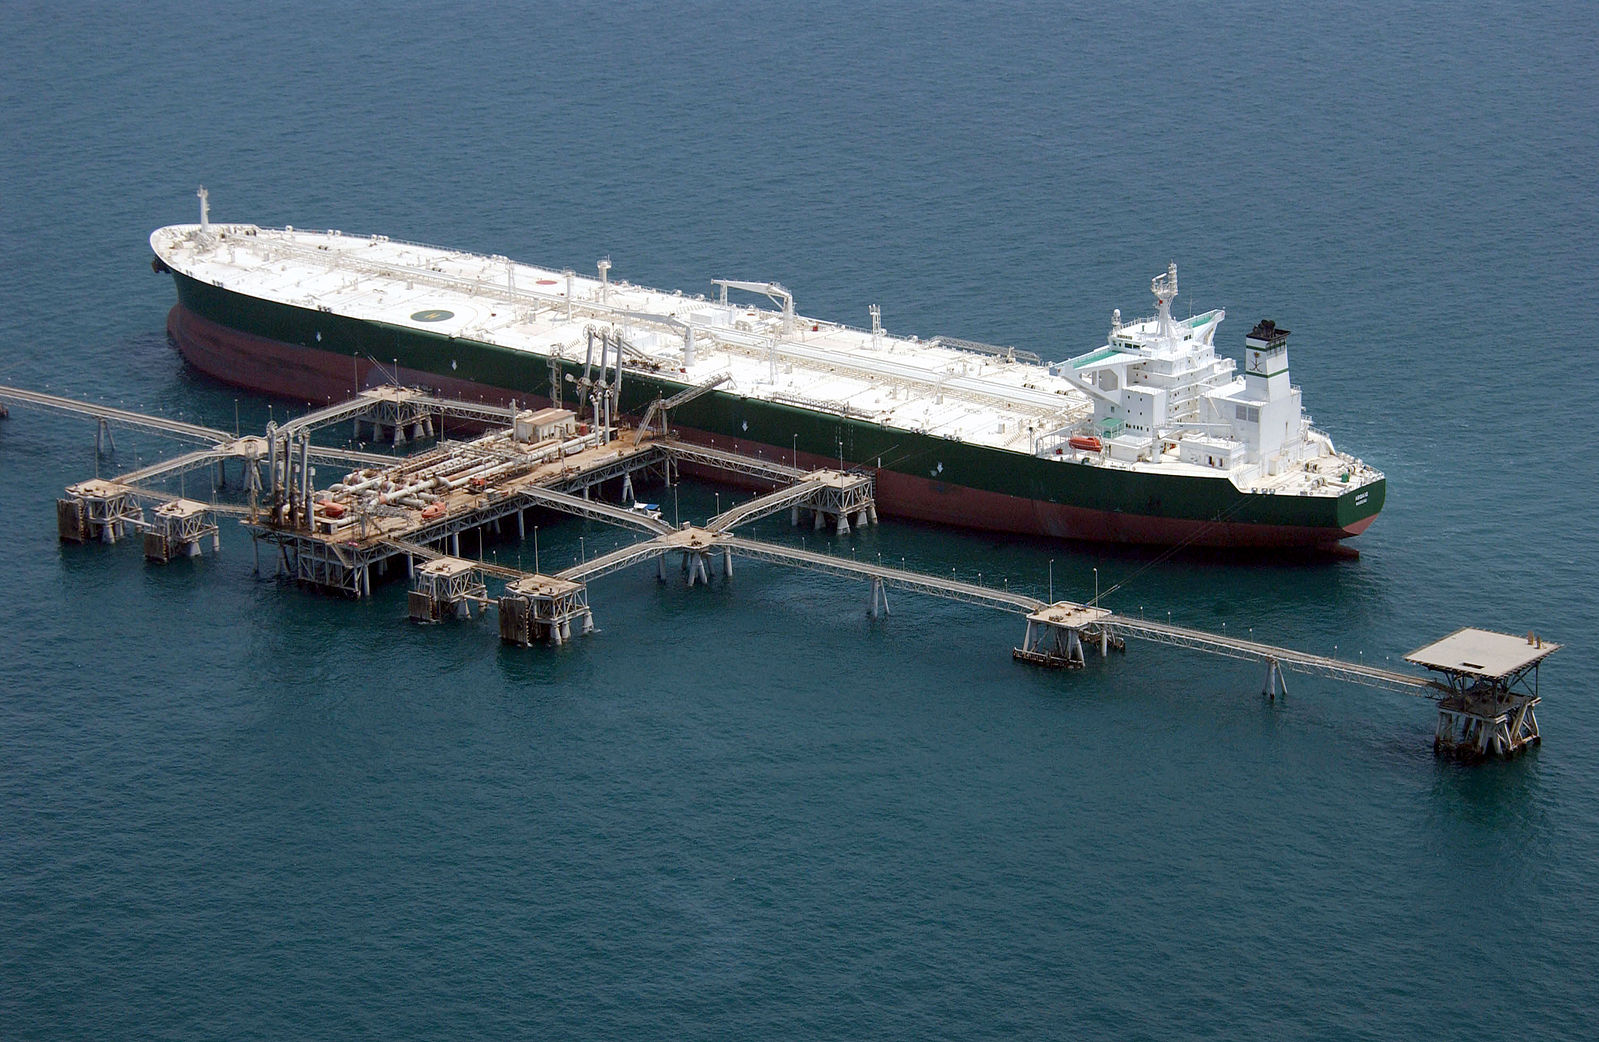 photograph of an oil tanker being loaded at Iraqi oil installation